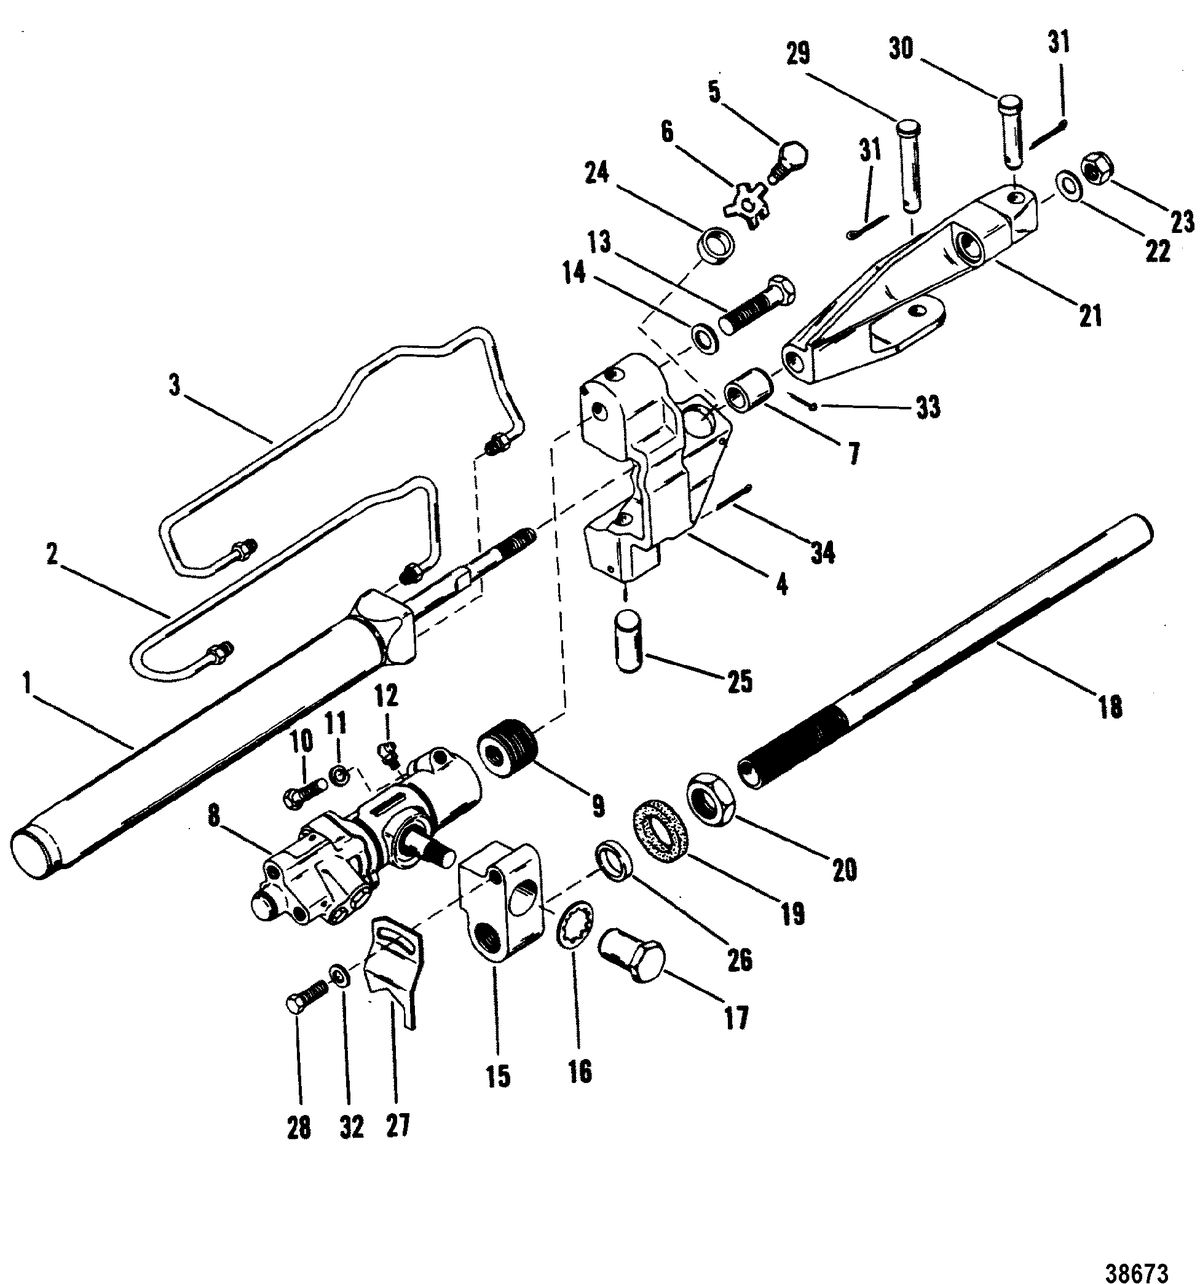 MERCRUISER BRAVO I/II/III STERNDRIVE AND TRANSOM ASSEMBLY POWER STEERING COMPONENTS(OLD DESIGN)